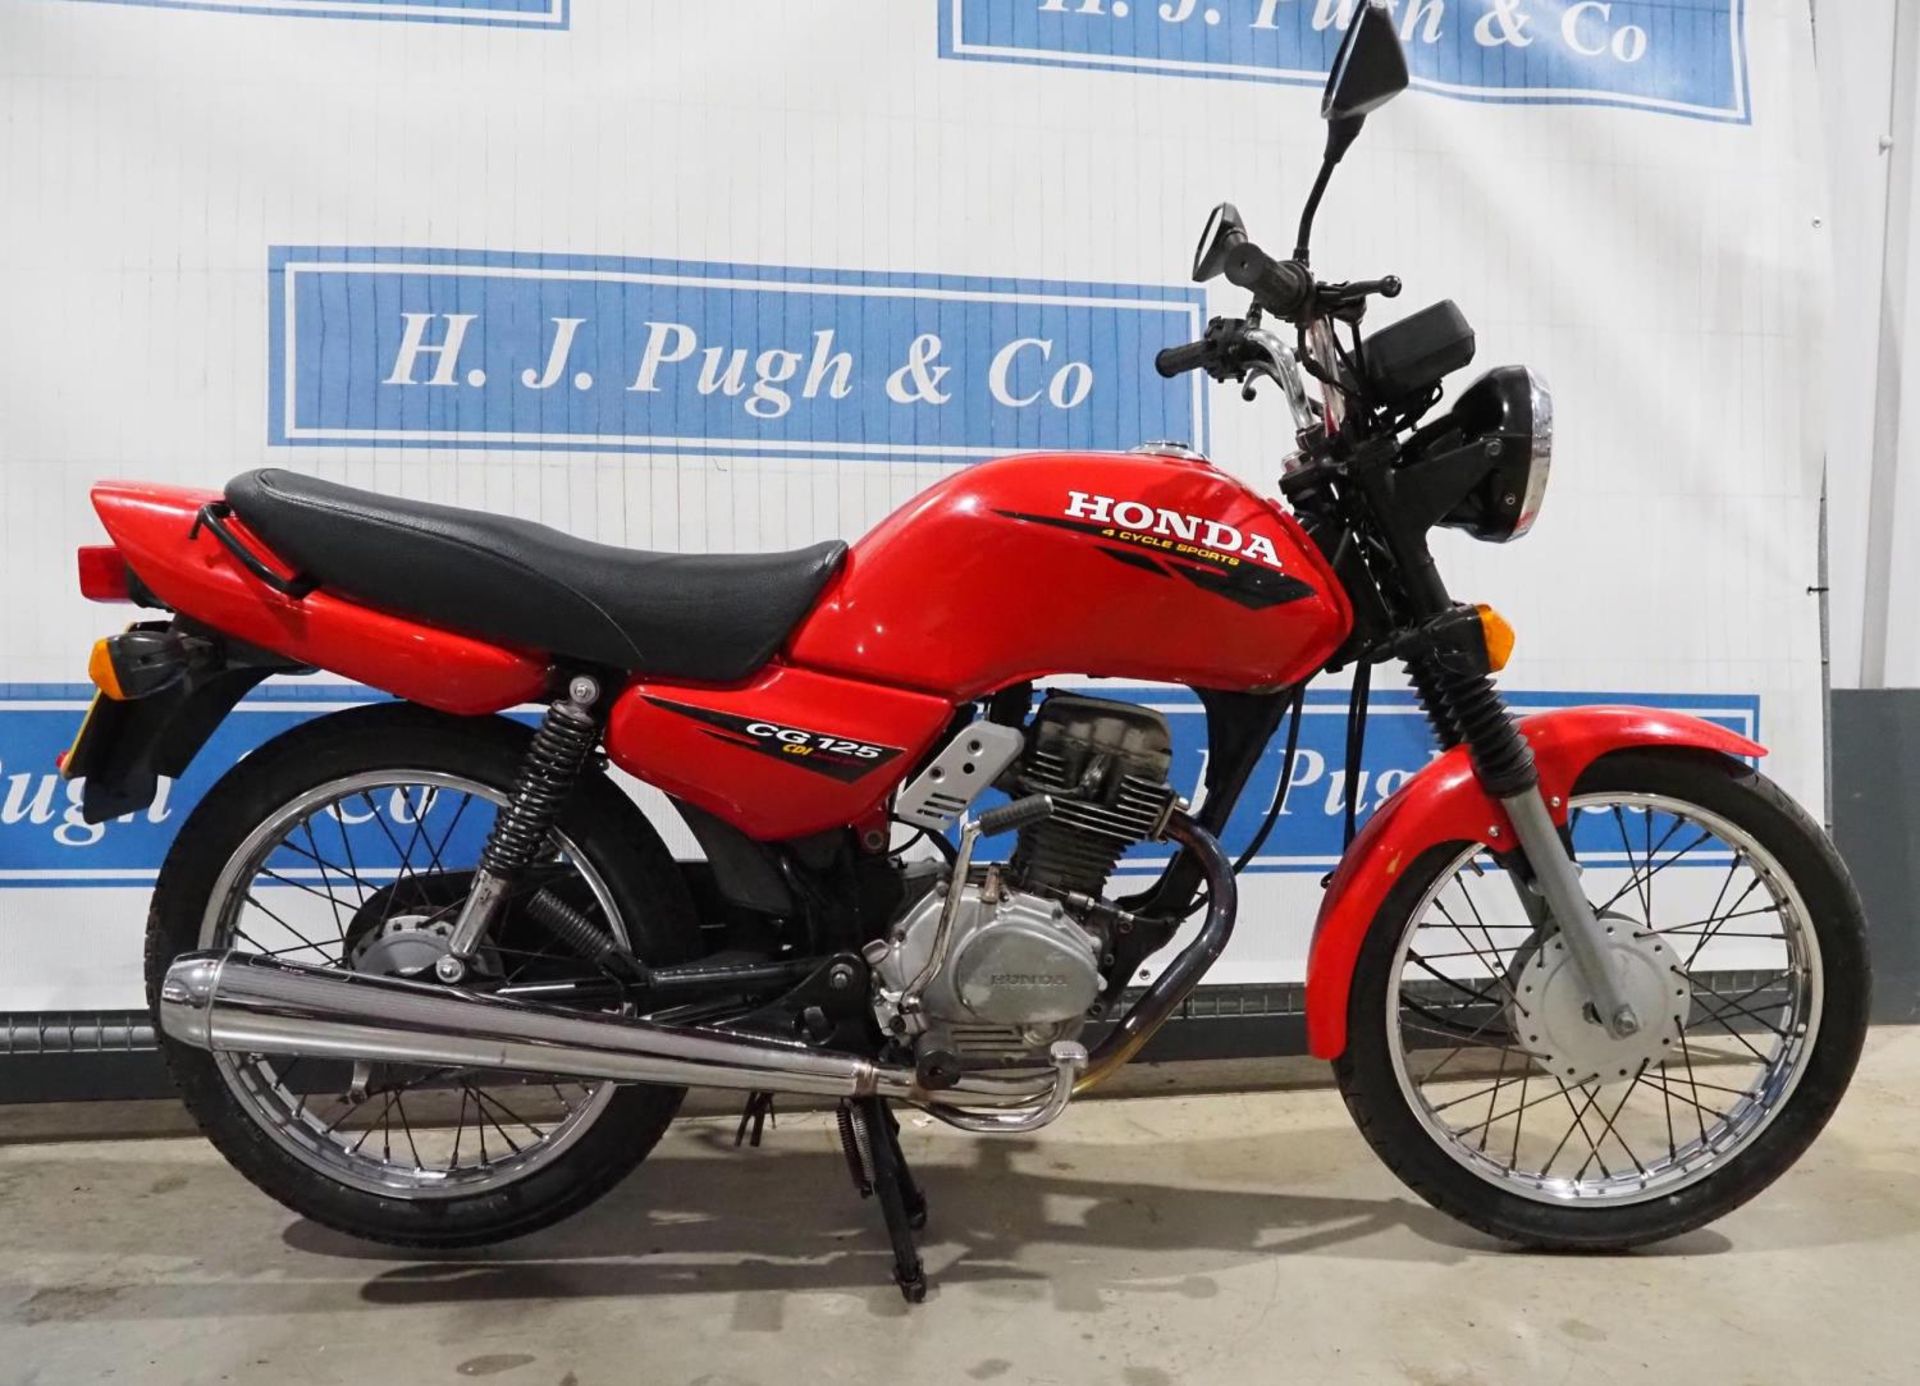 Honda CG125 motorcycle. 1998. 124cc. MOT until 27.03.2023. Starts and runs. Engine number does not